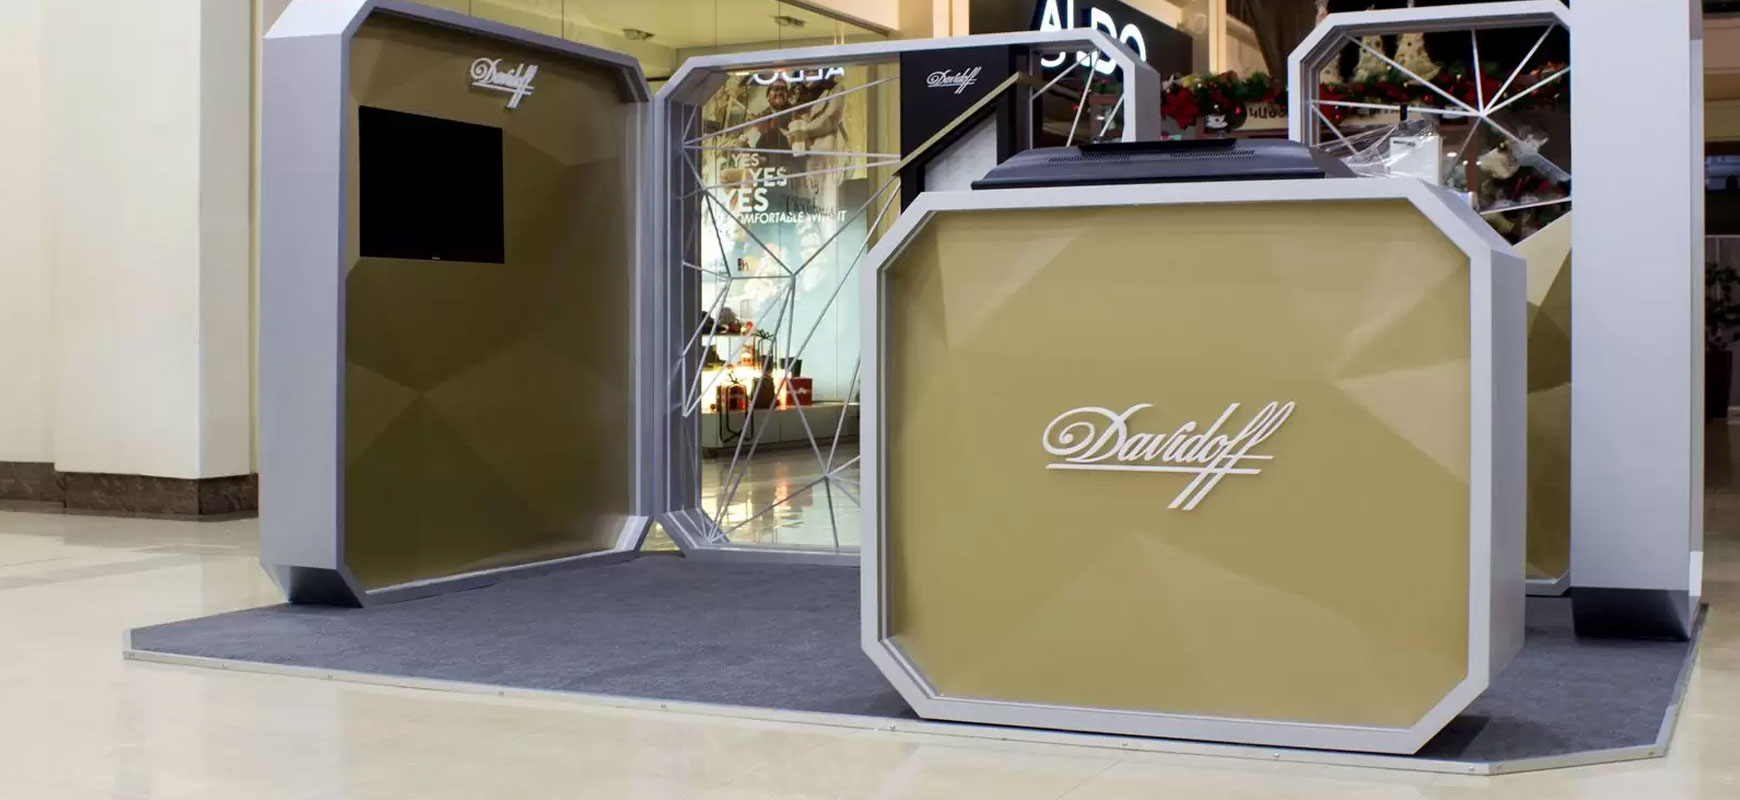 Davidoff trade show sign with white brand name letters made of wood, acrylic, and aluminum